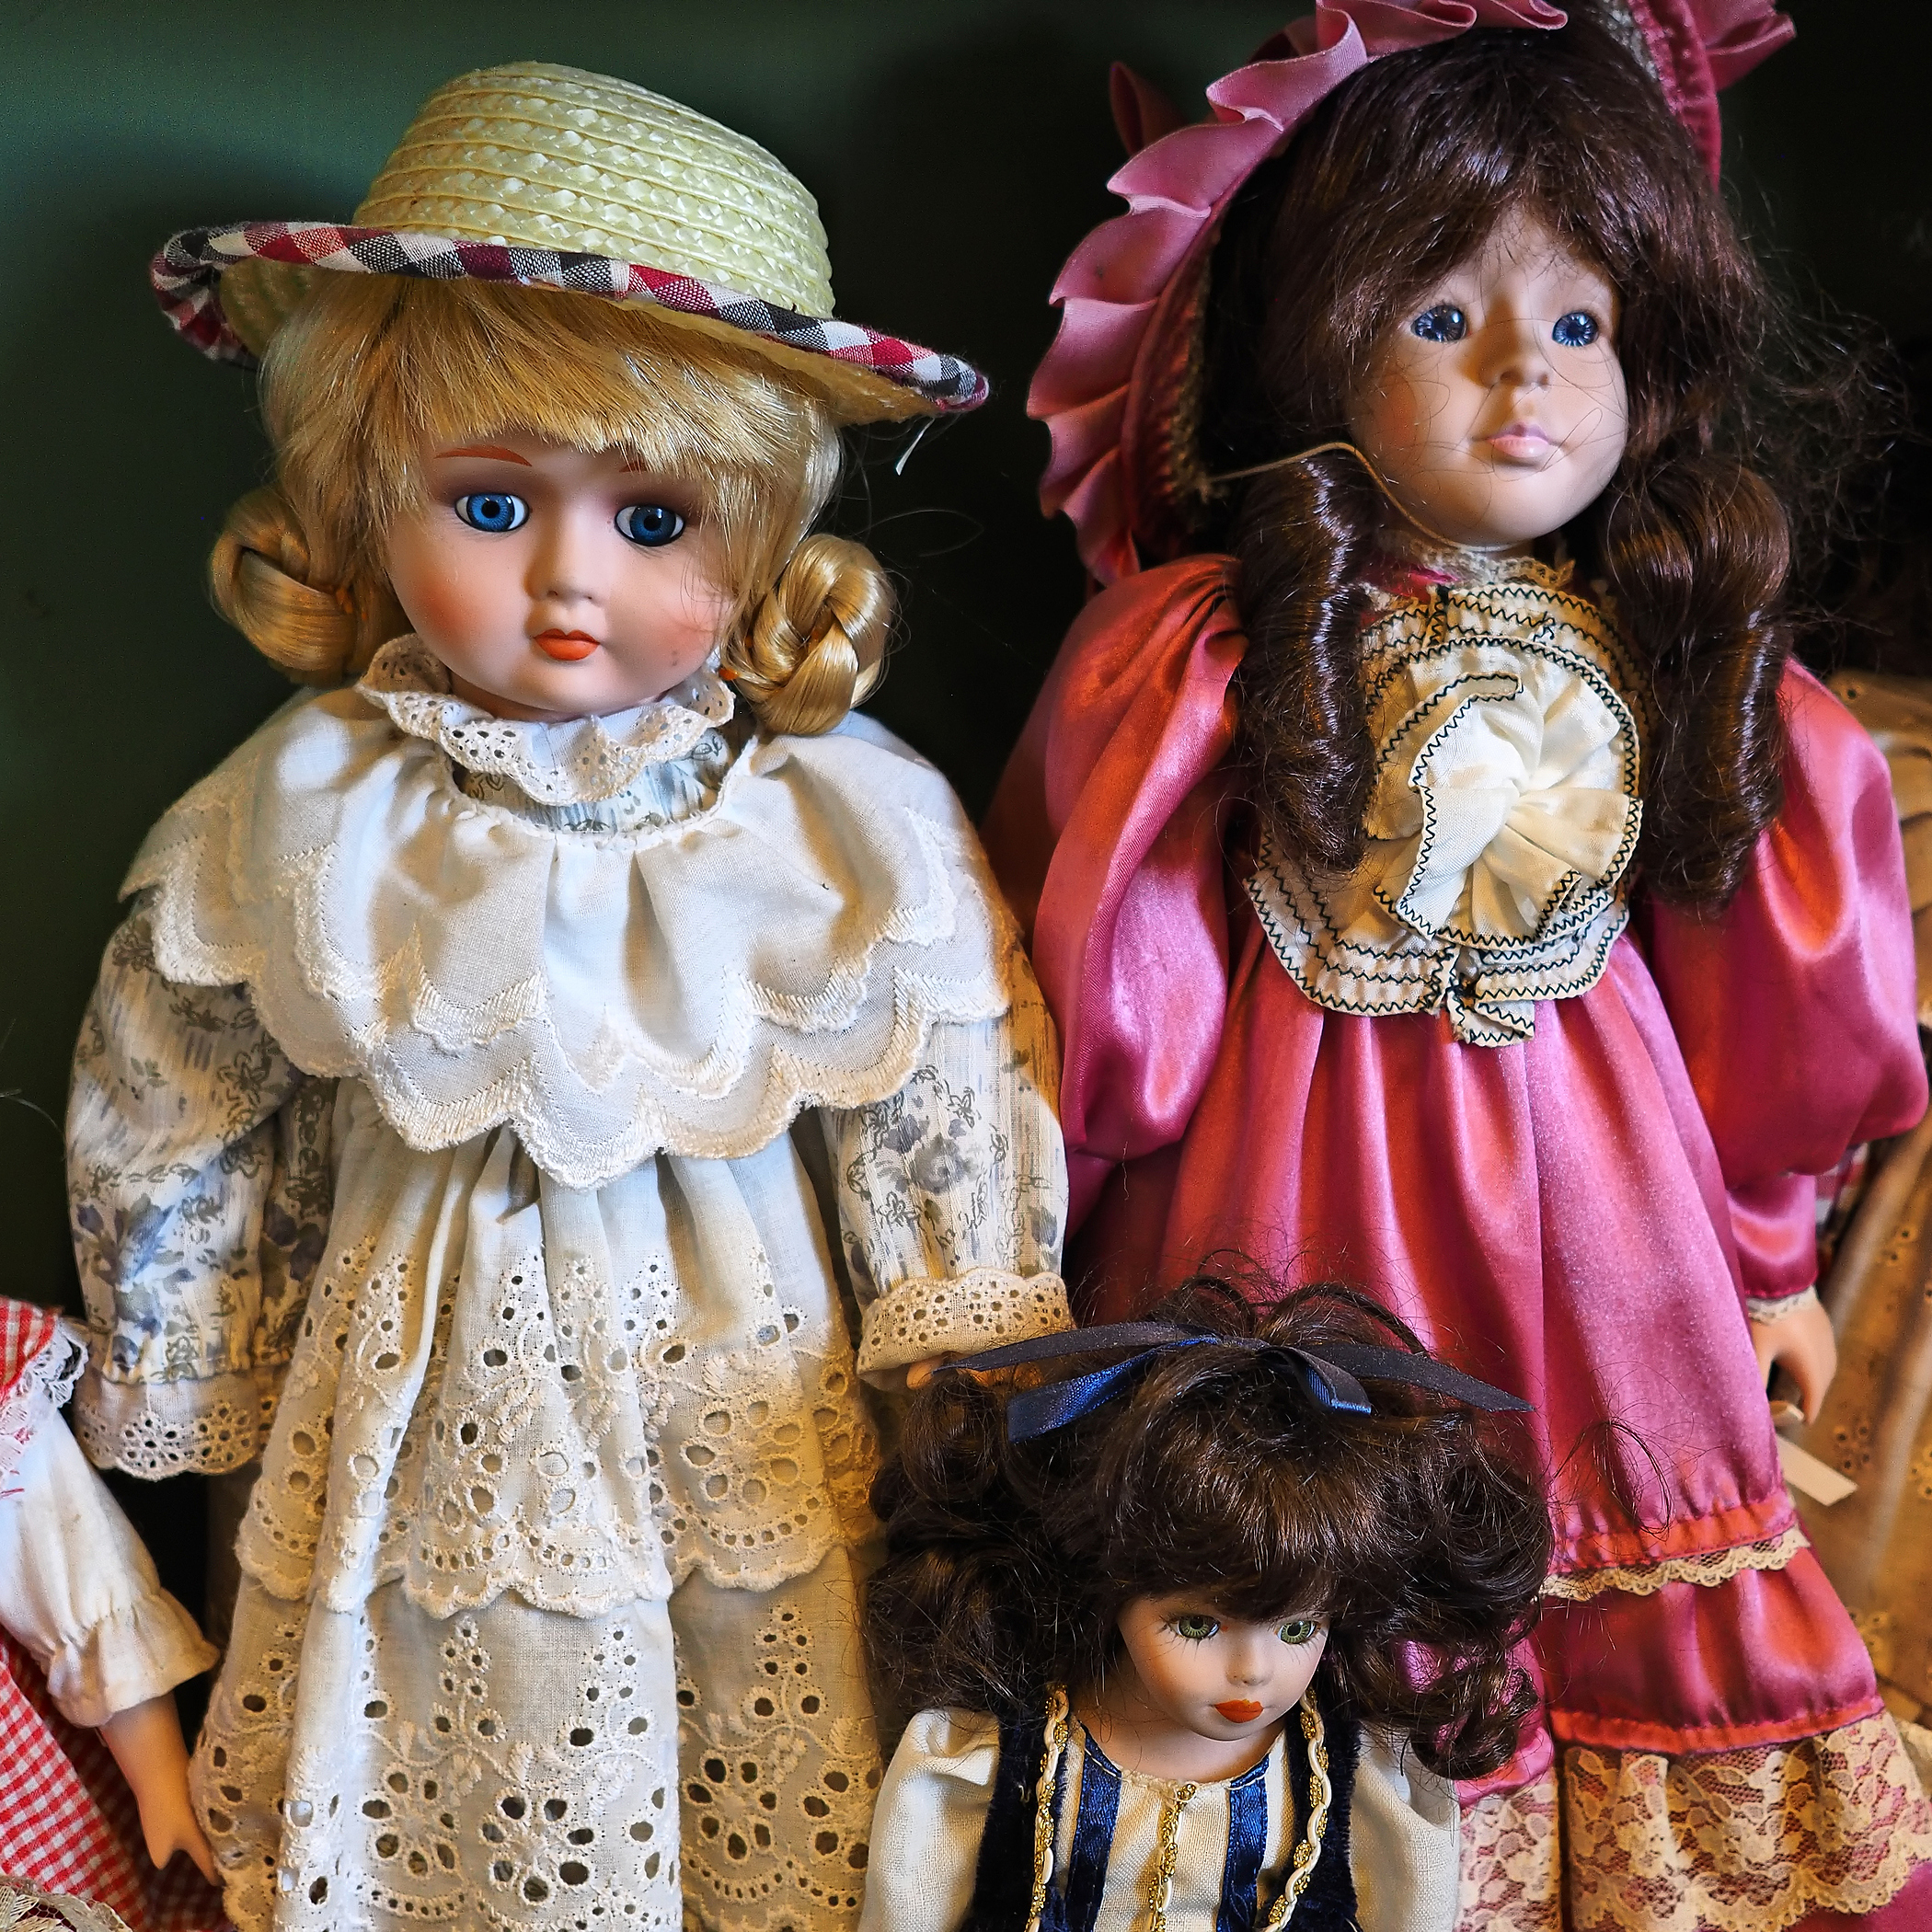 Introduction to Bisque and Porcelain Dolls